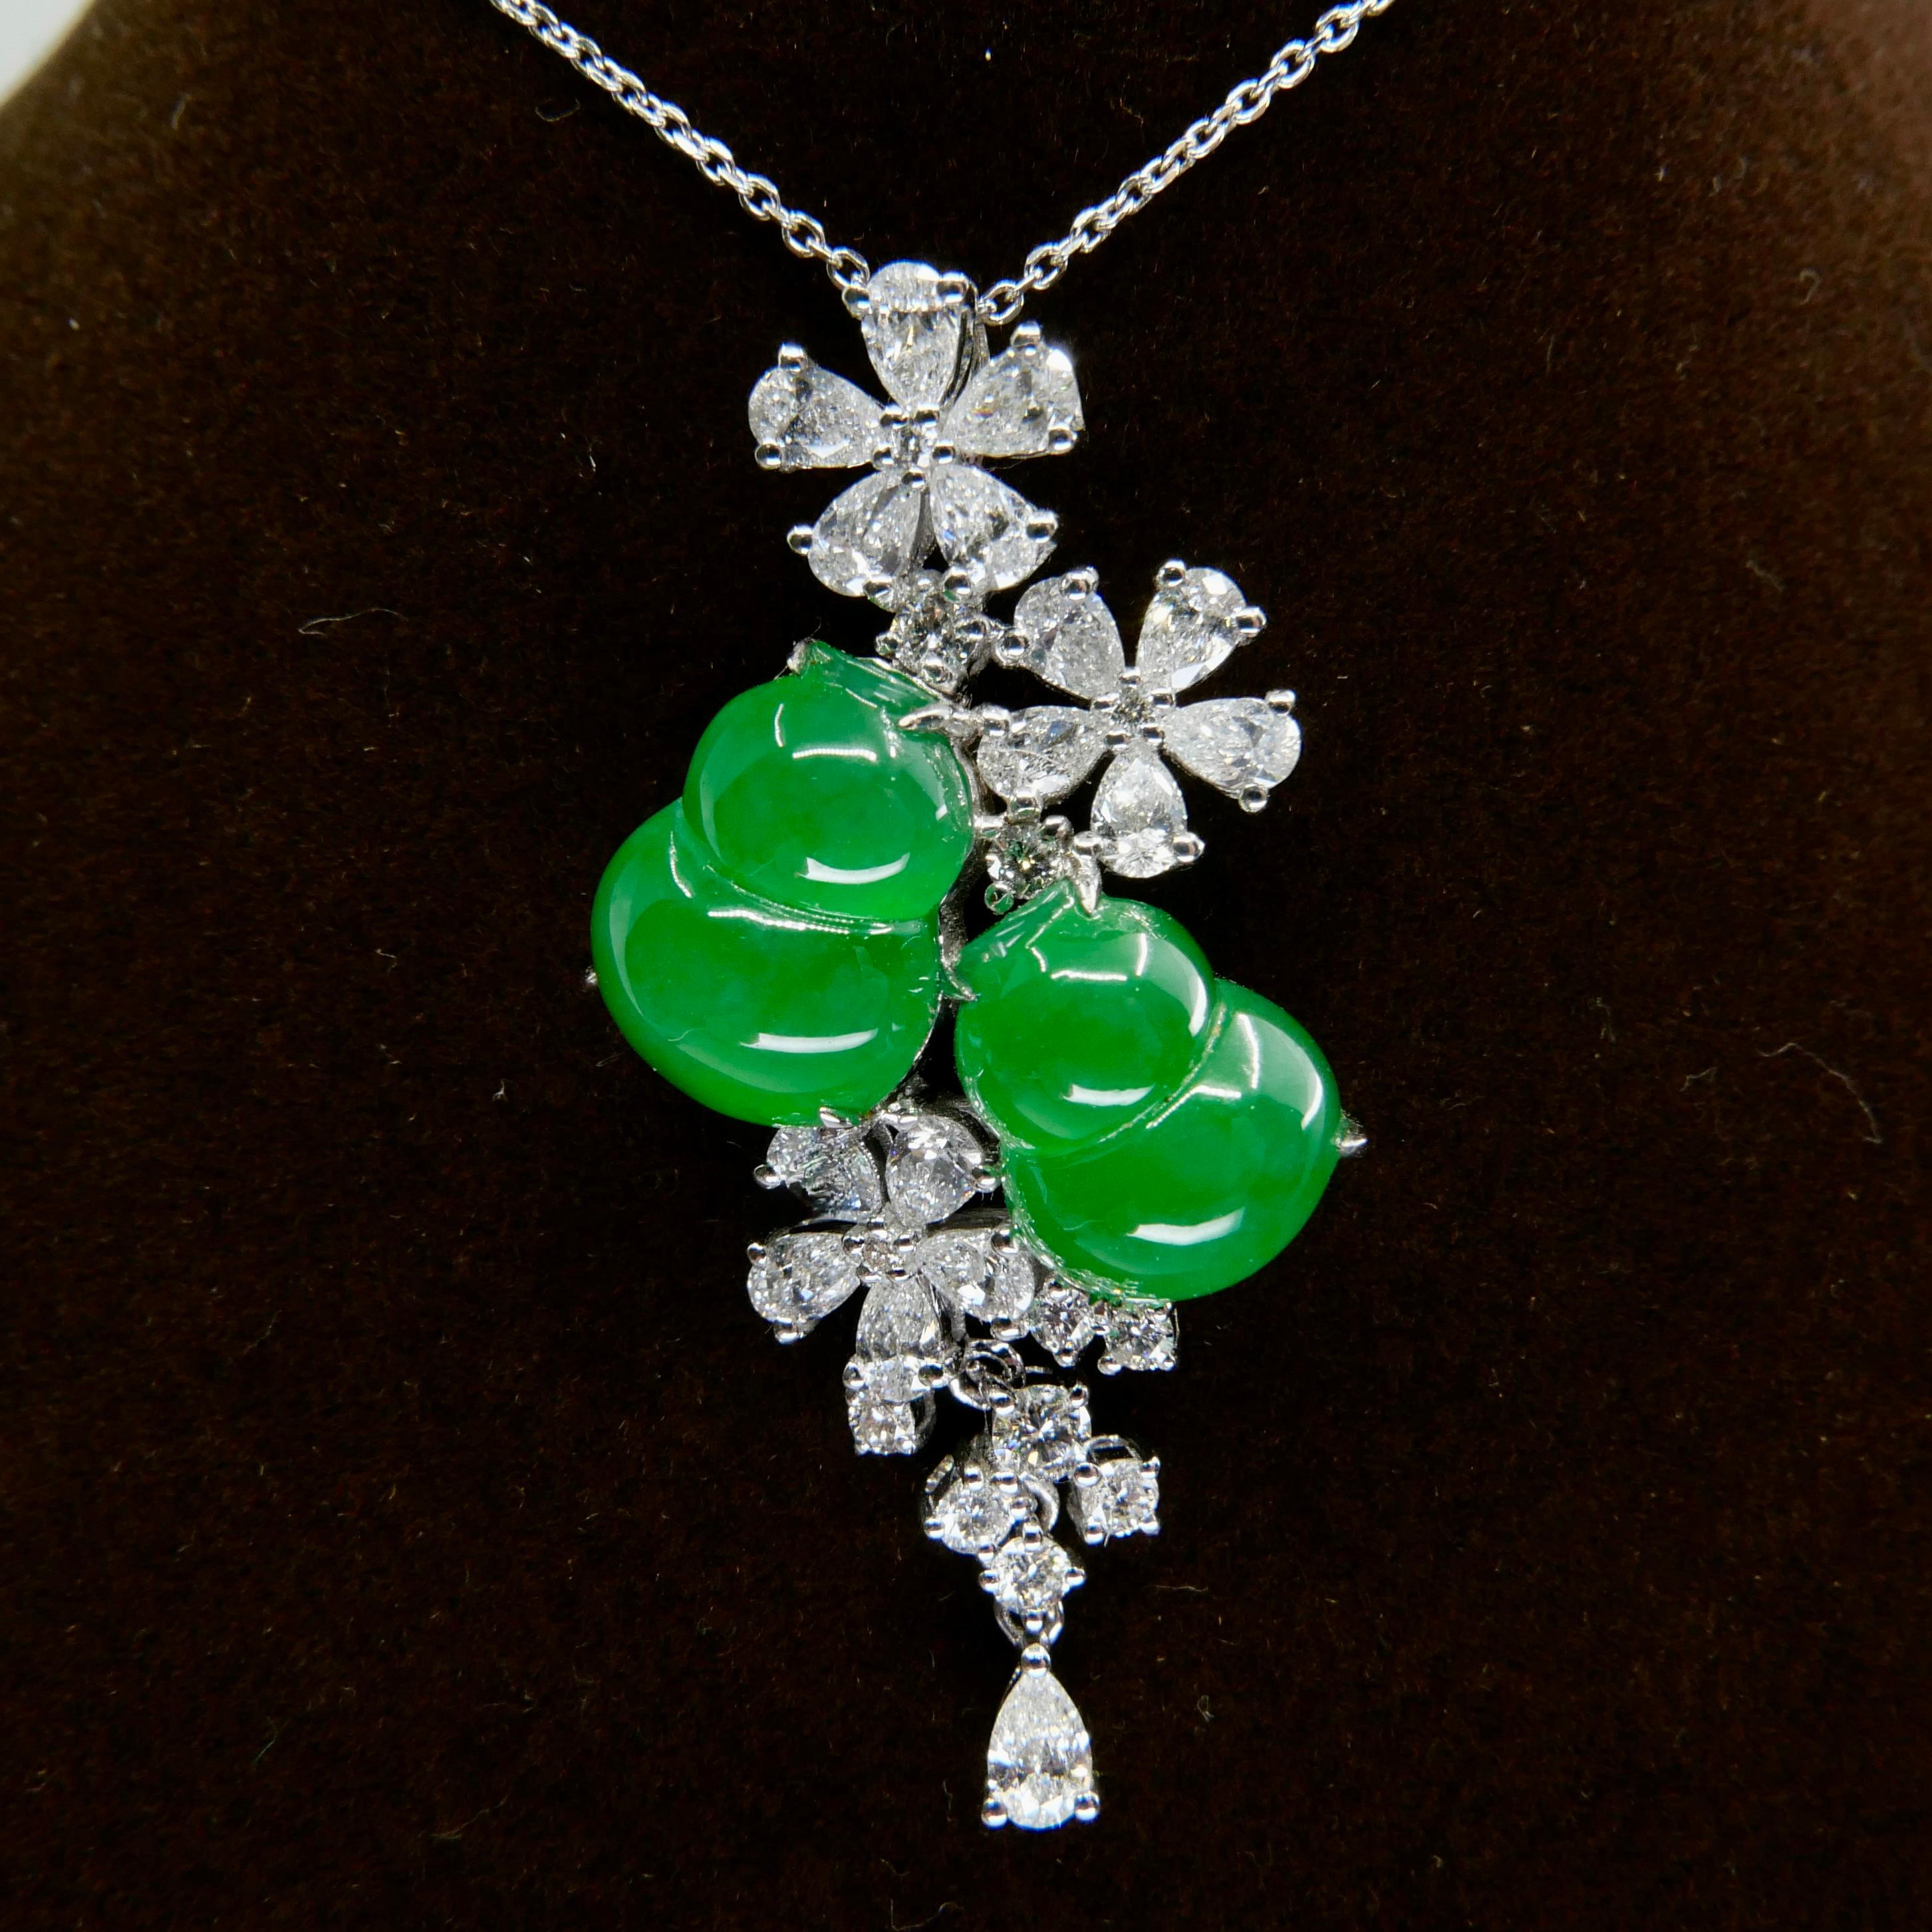 Rough Cut Certified Type A Icy Jade Gourd Diamond Pendant Necklace, Intense Apple Green For Sale